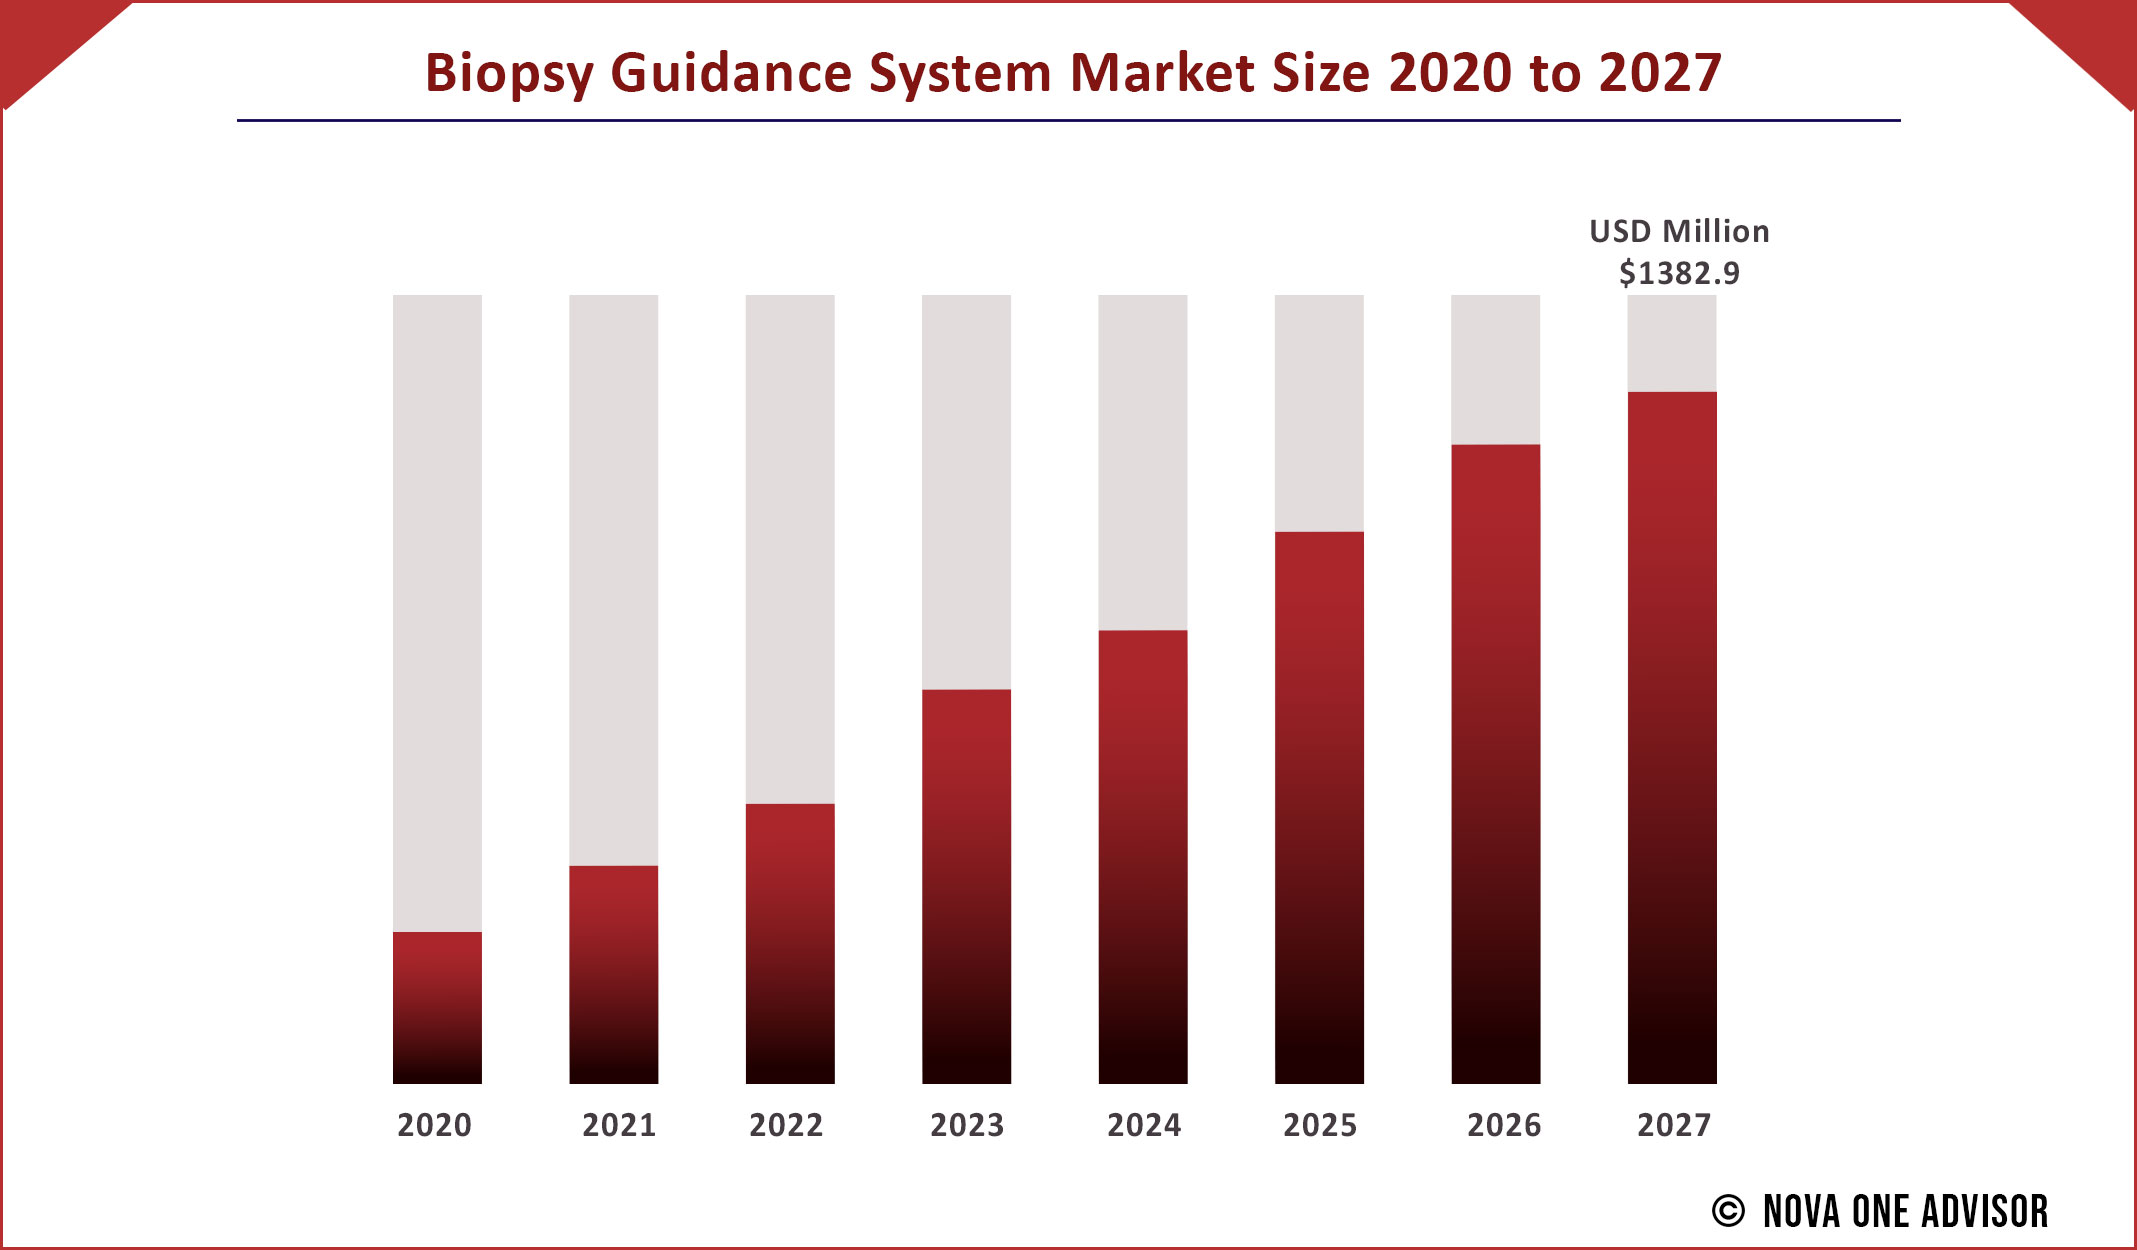 Biopsy Guidance System Market Size 2020 to 2027